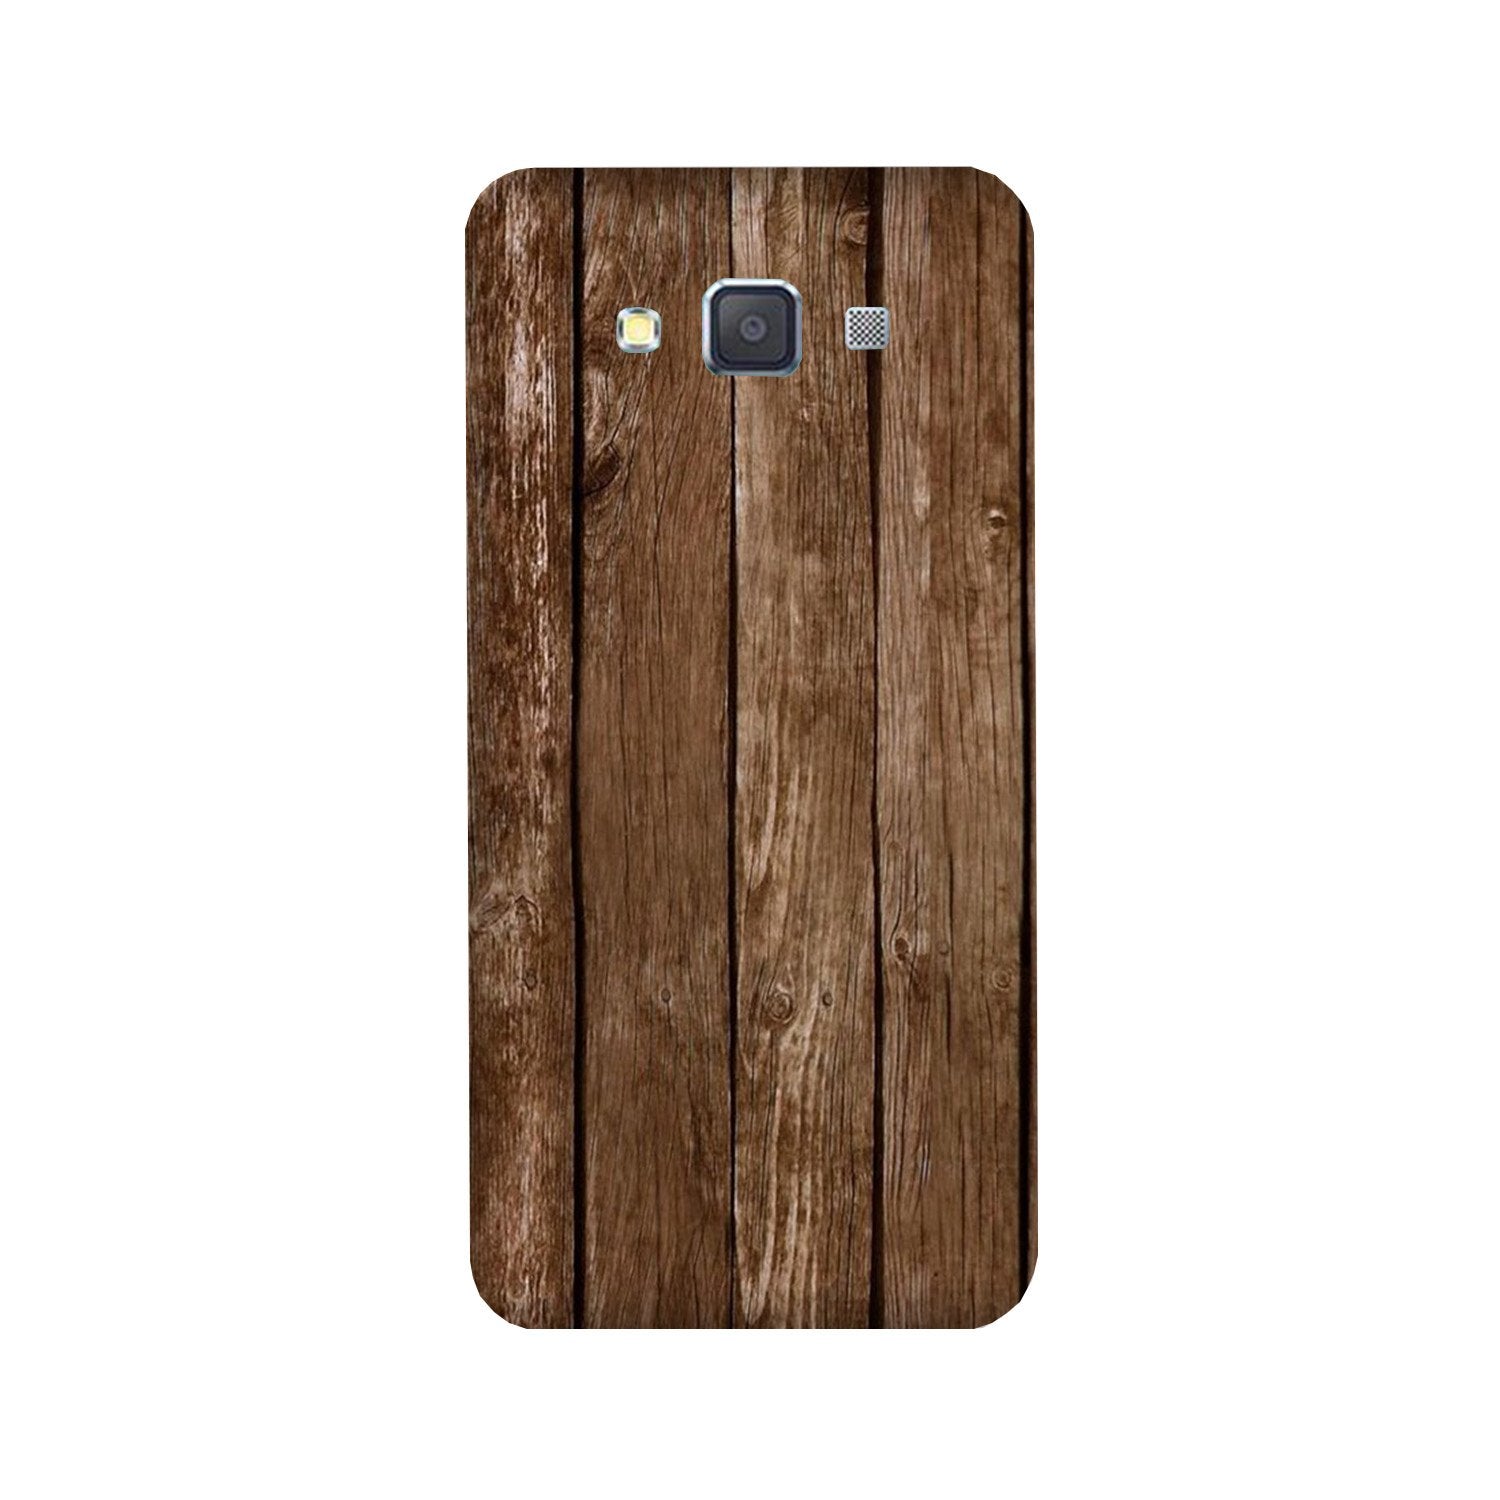 Wooden Look Case for Galaxy Grand Max(Design - 112)